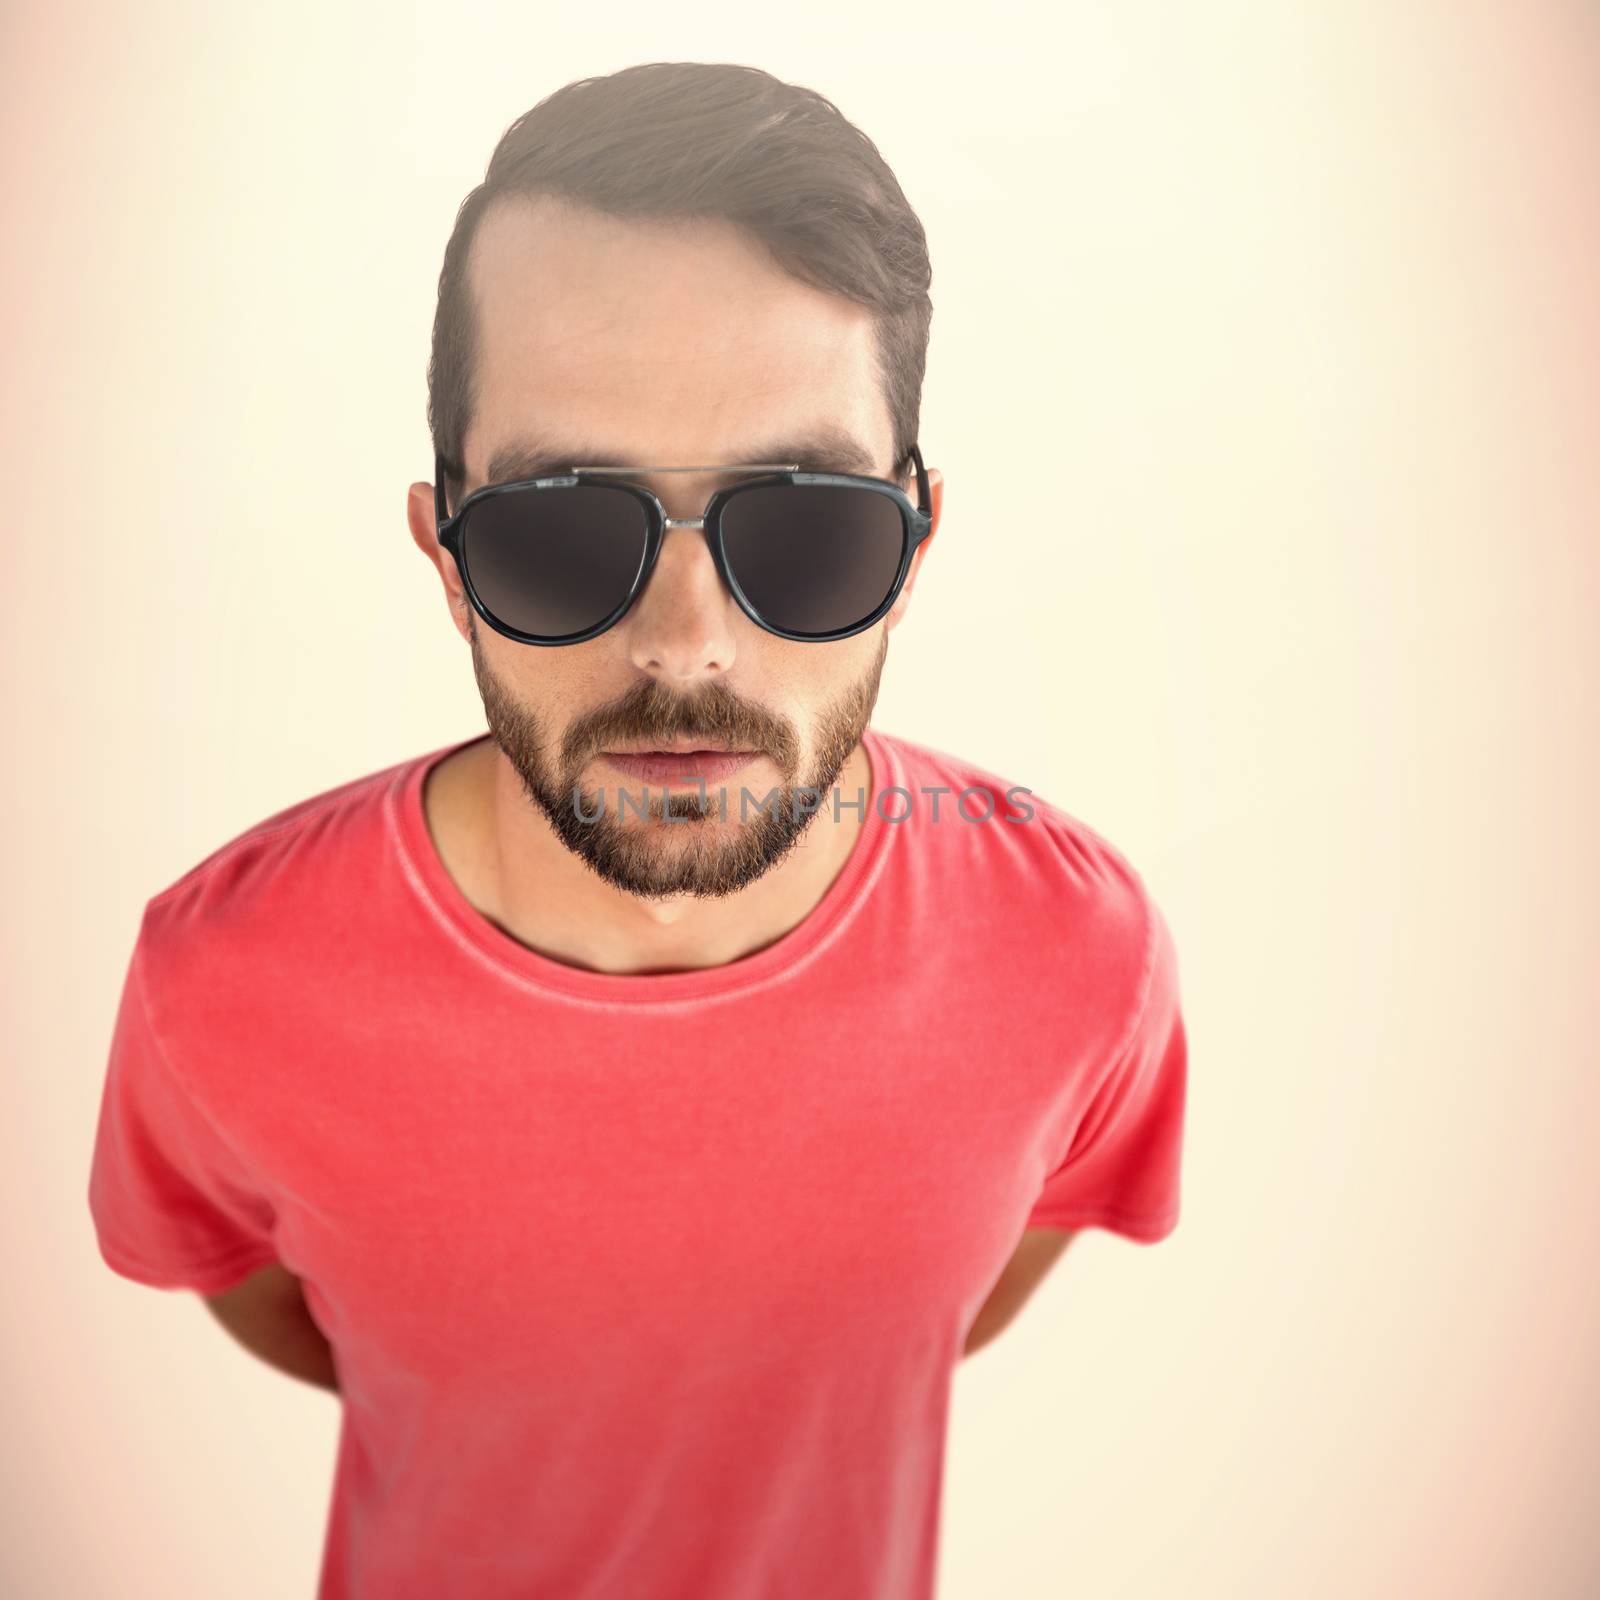 Composite image of male model in sunglasses against white background by Wavebreakmedia